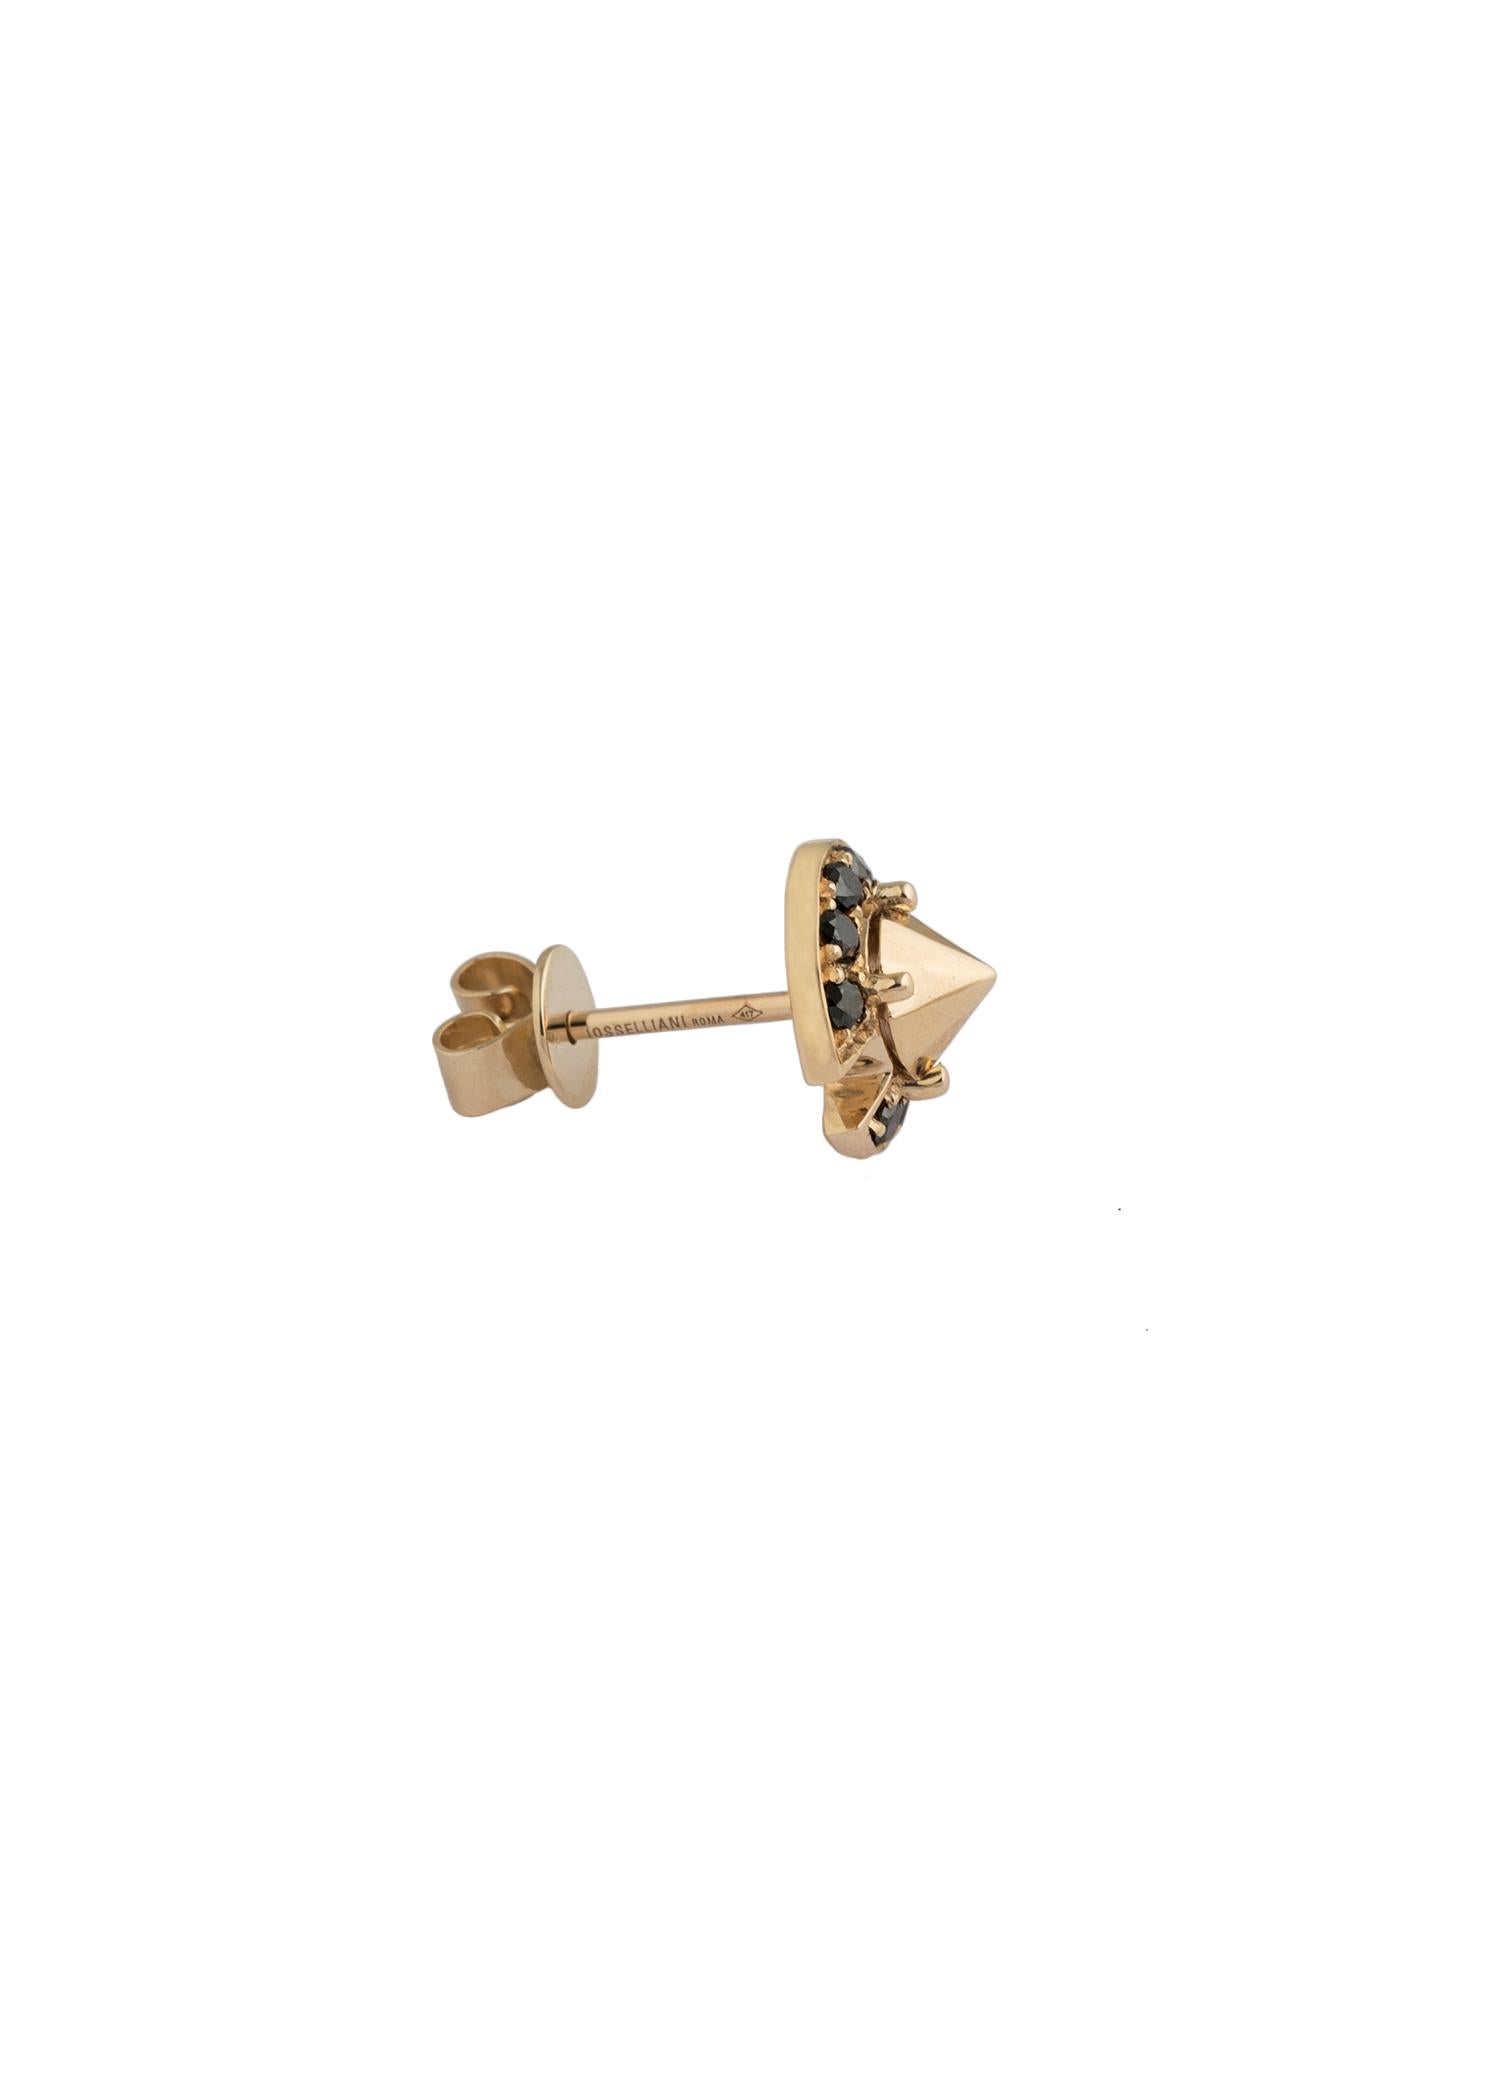 Surrounded by a black diamond round pavé to define the centeral stud, this single pierced earring walks the balance of edge and elegance. 
Crafted in 10carat yellow gold,  the earring is offered in a single style that can be worn alone and mixed